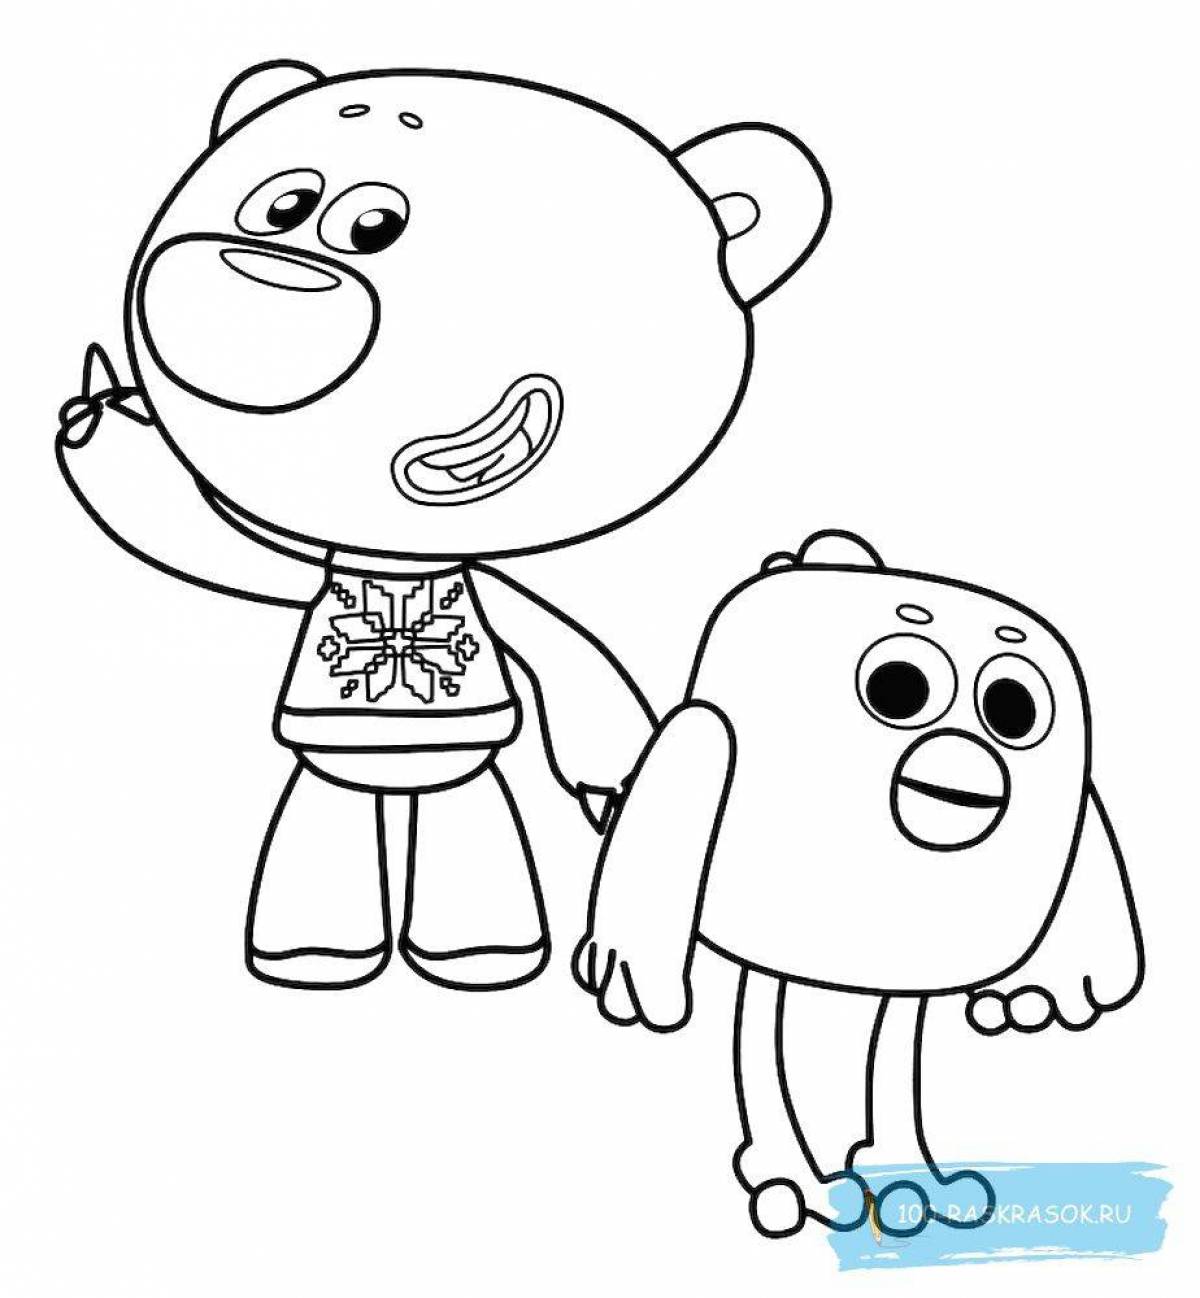 Turn on the cute bear coloring #13